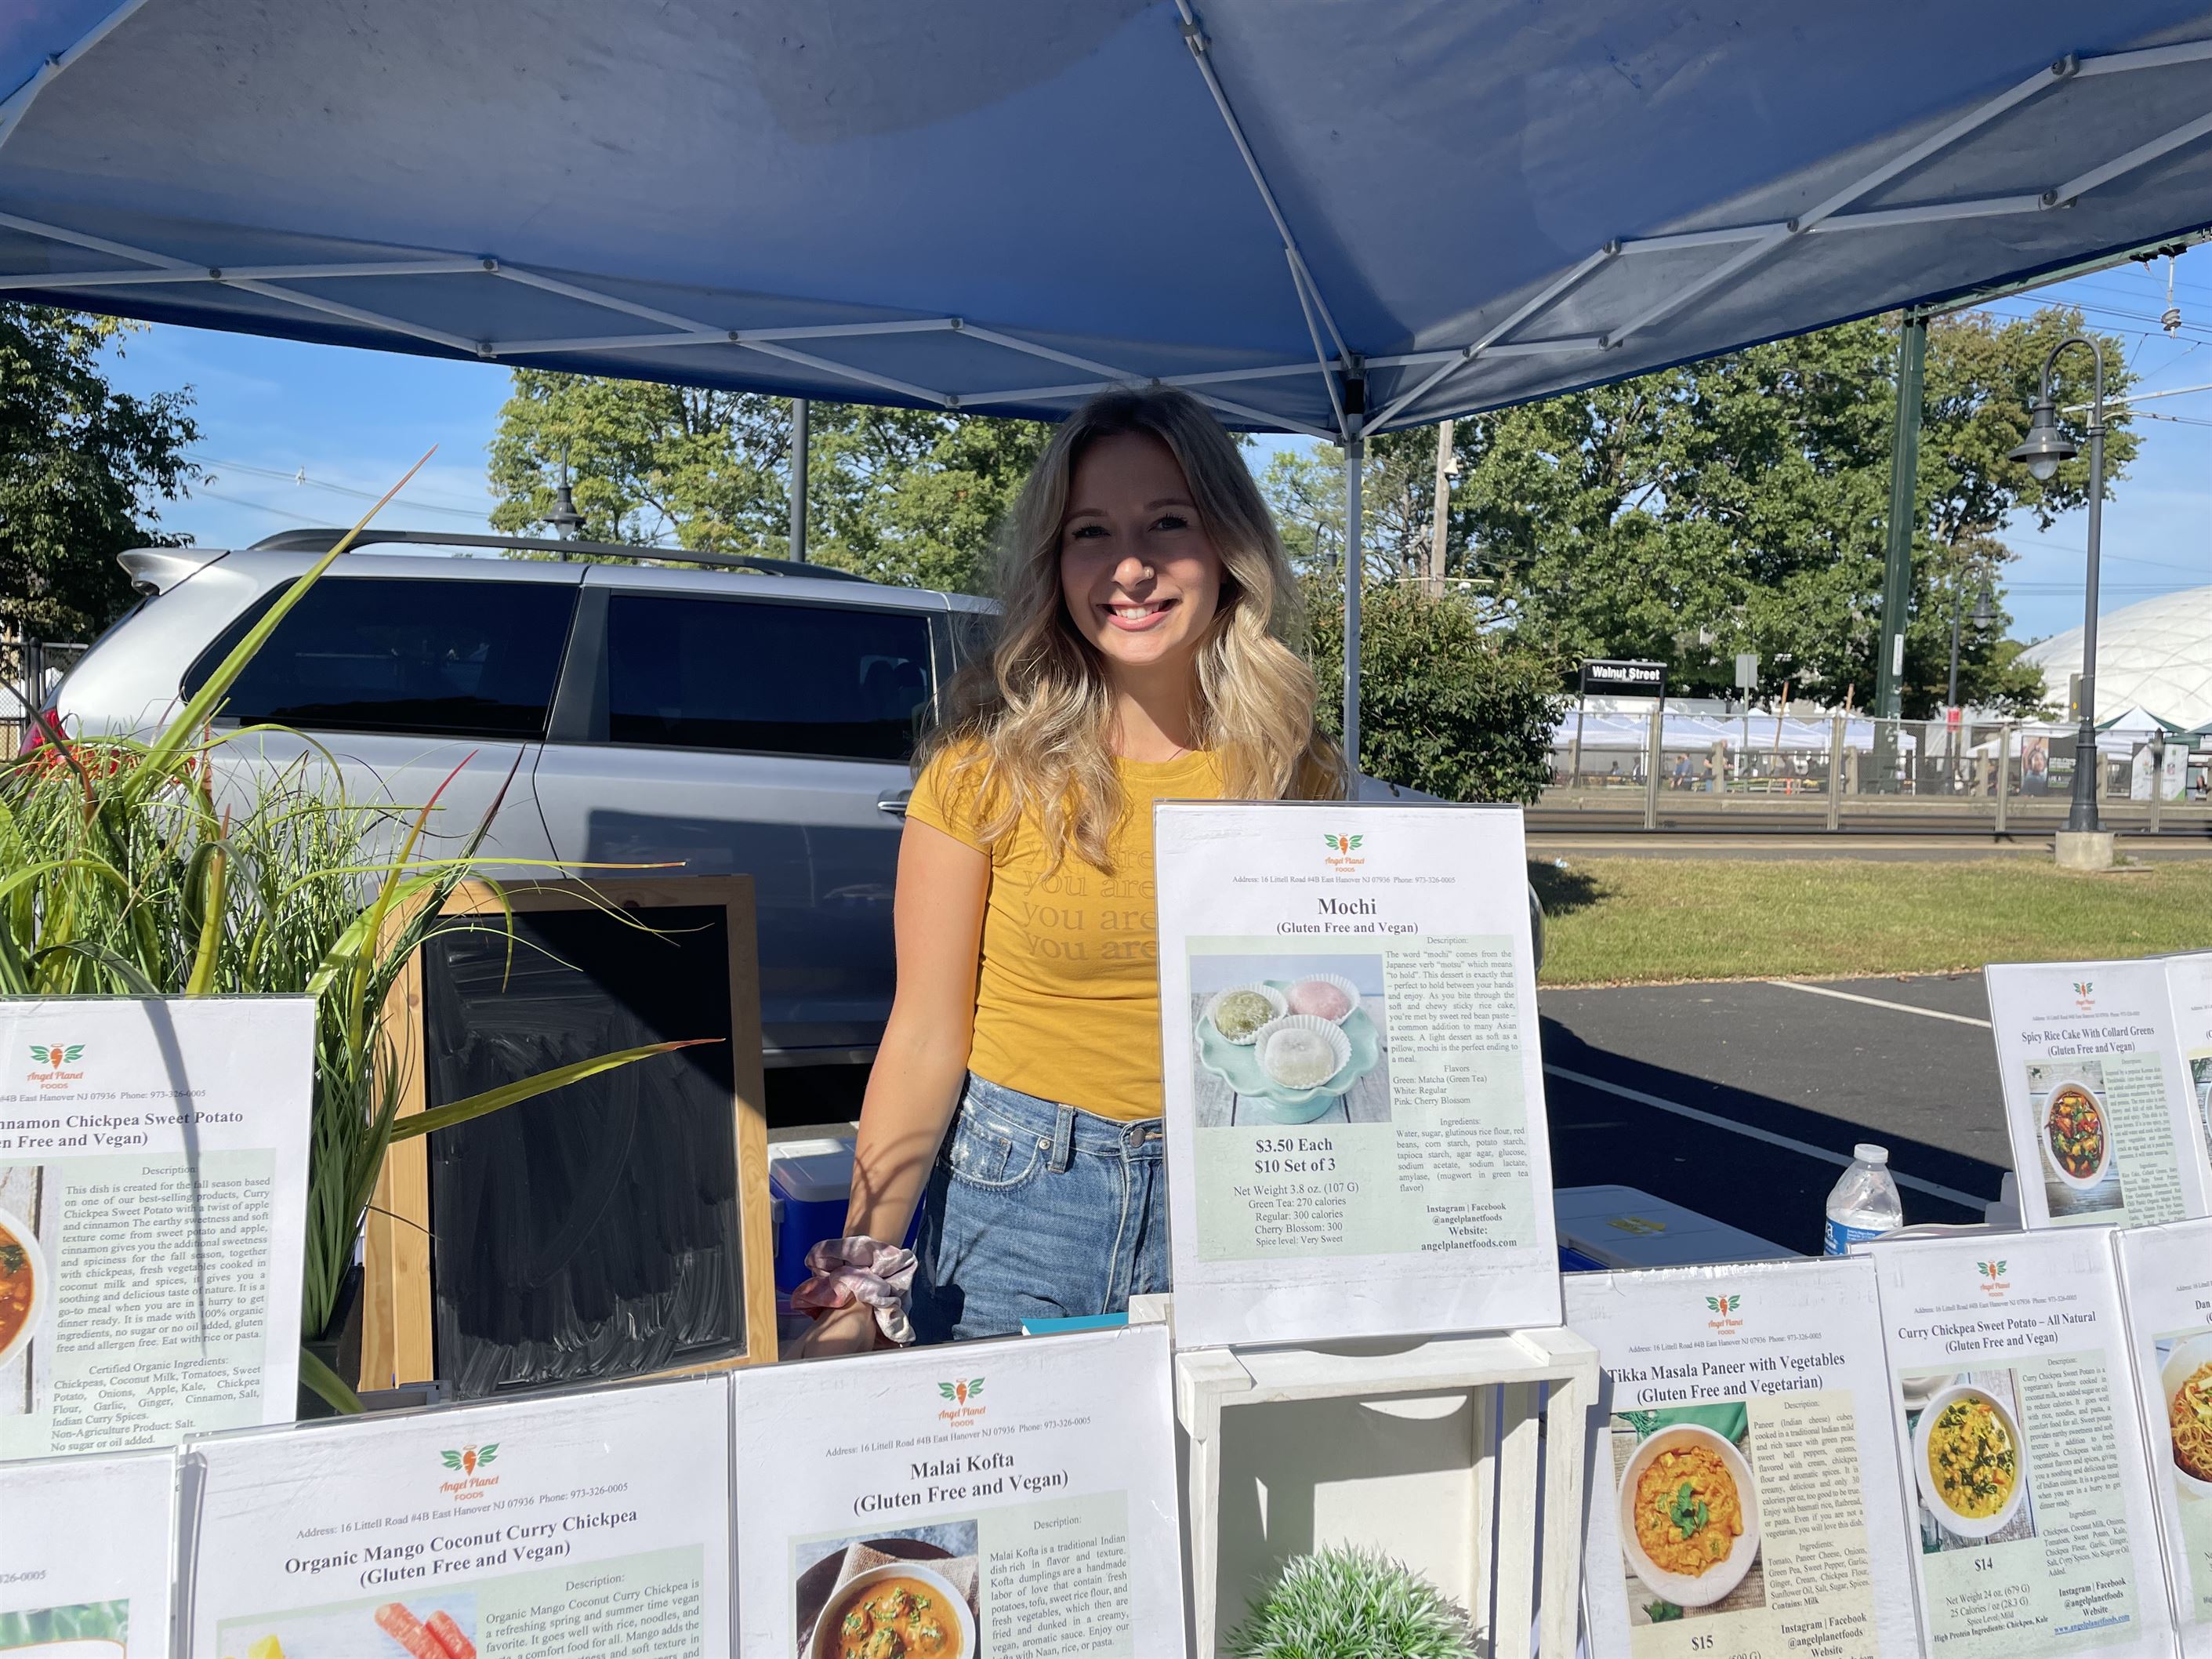 Caitlin Lonergan started selling vegan dishes at the market during the pandemic in September 2020. Photo courtesy of Amanda Alicea